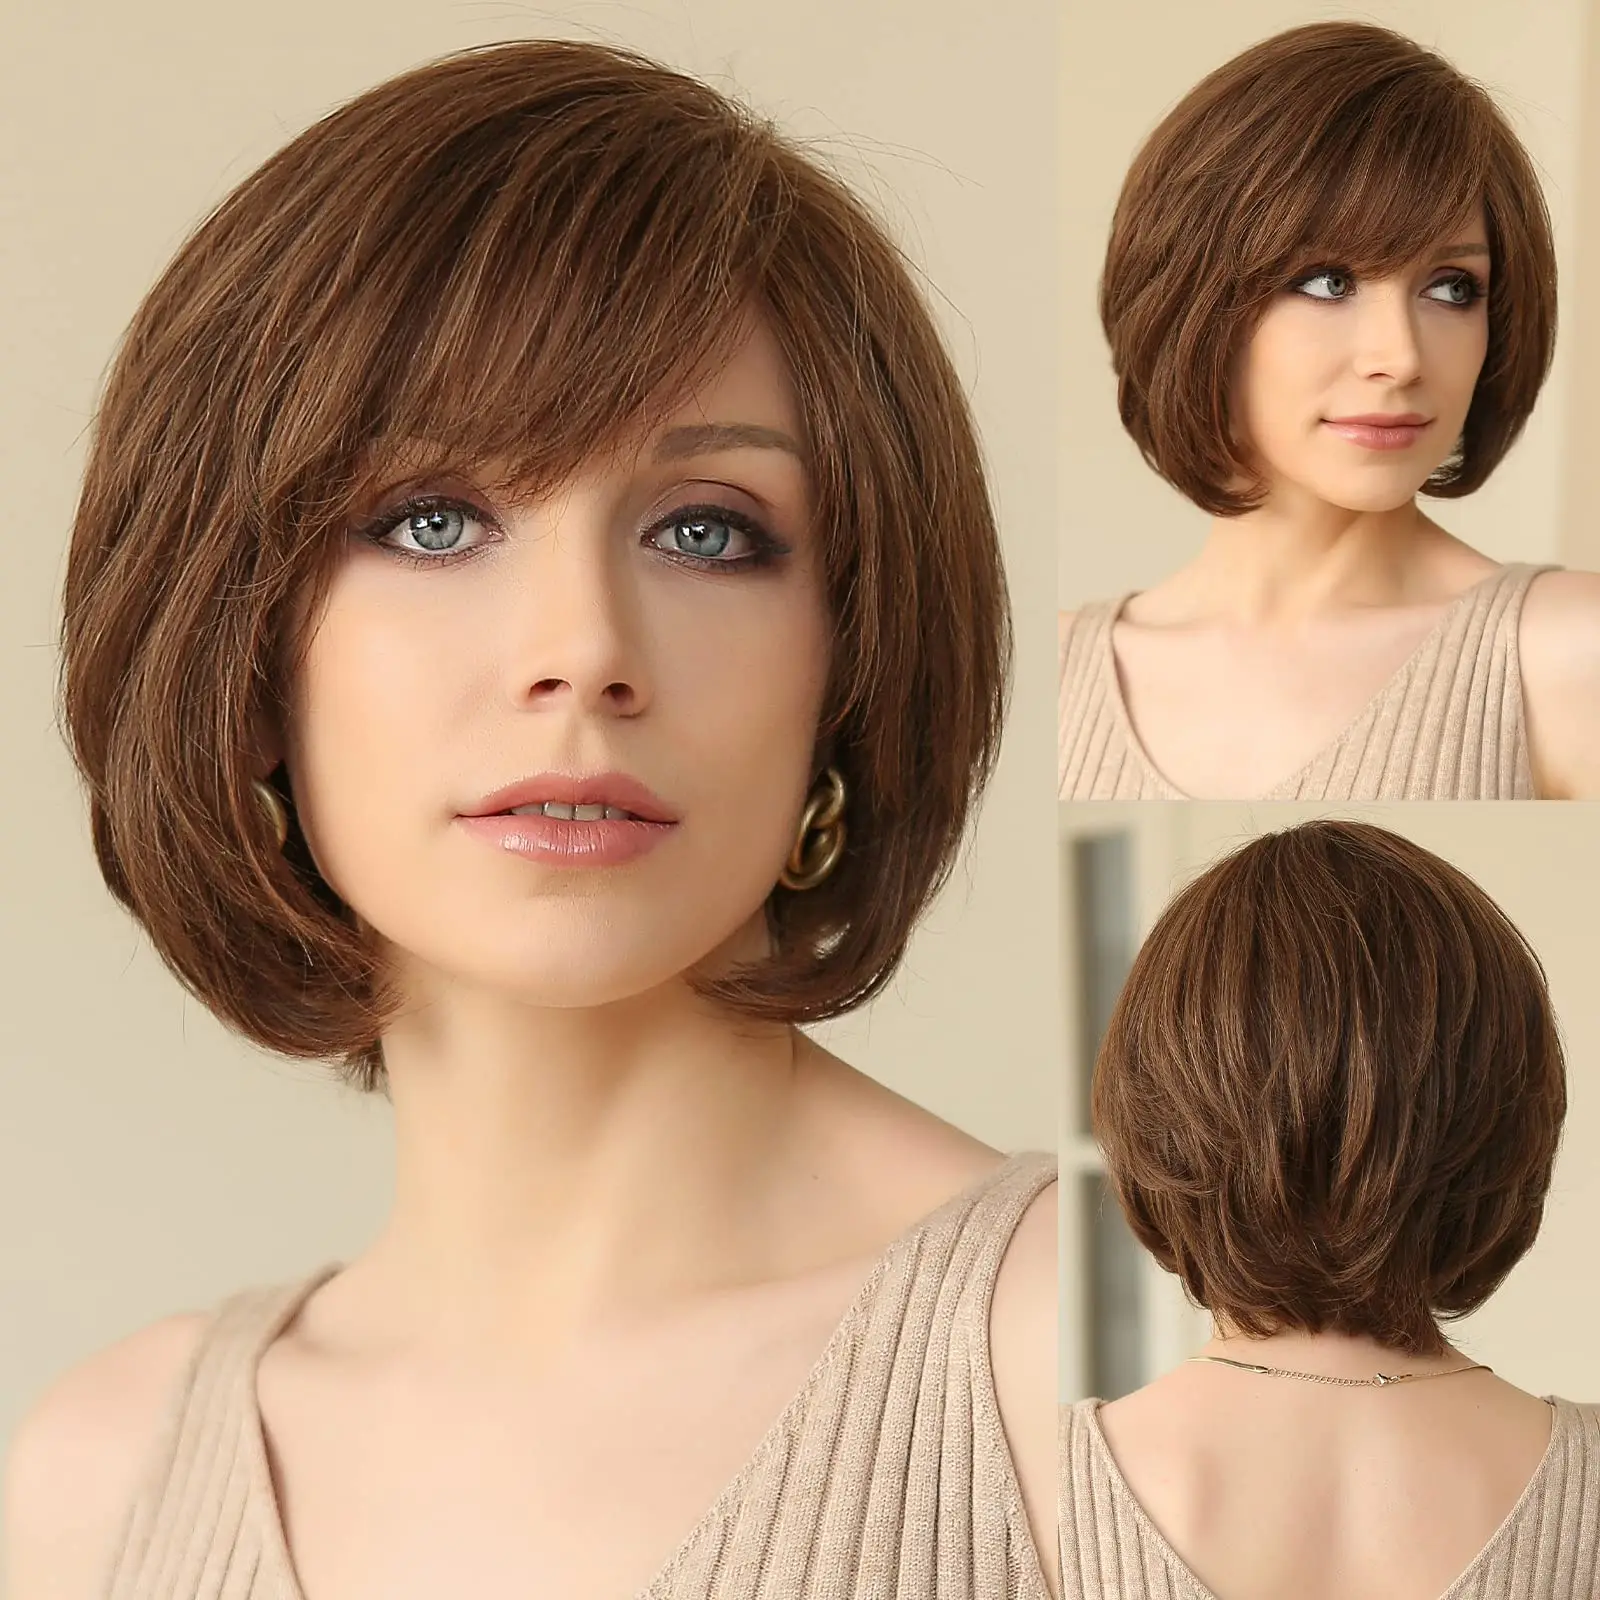 

Lace Frontal Remy Human Hair Wigs Natural Brown Short Wavy Layered Bob Wig with Bangs Human Hair Lace Wig for White Women Daily